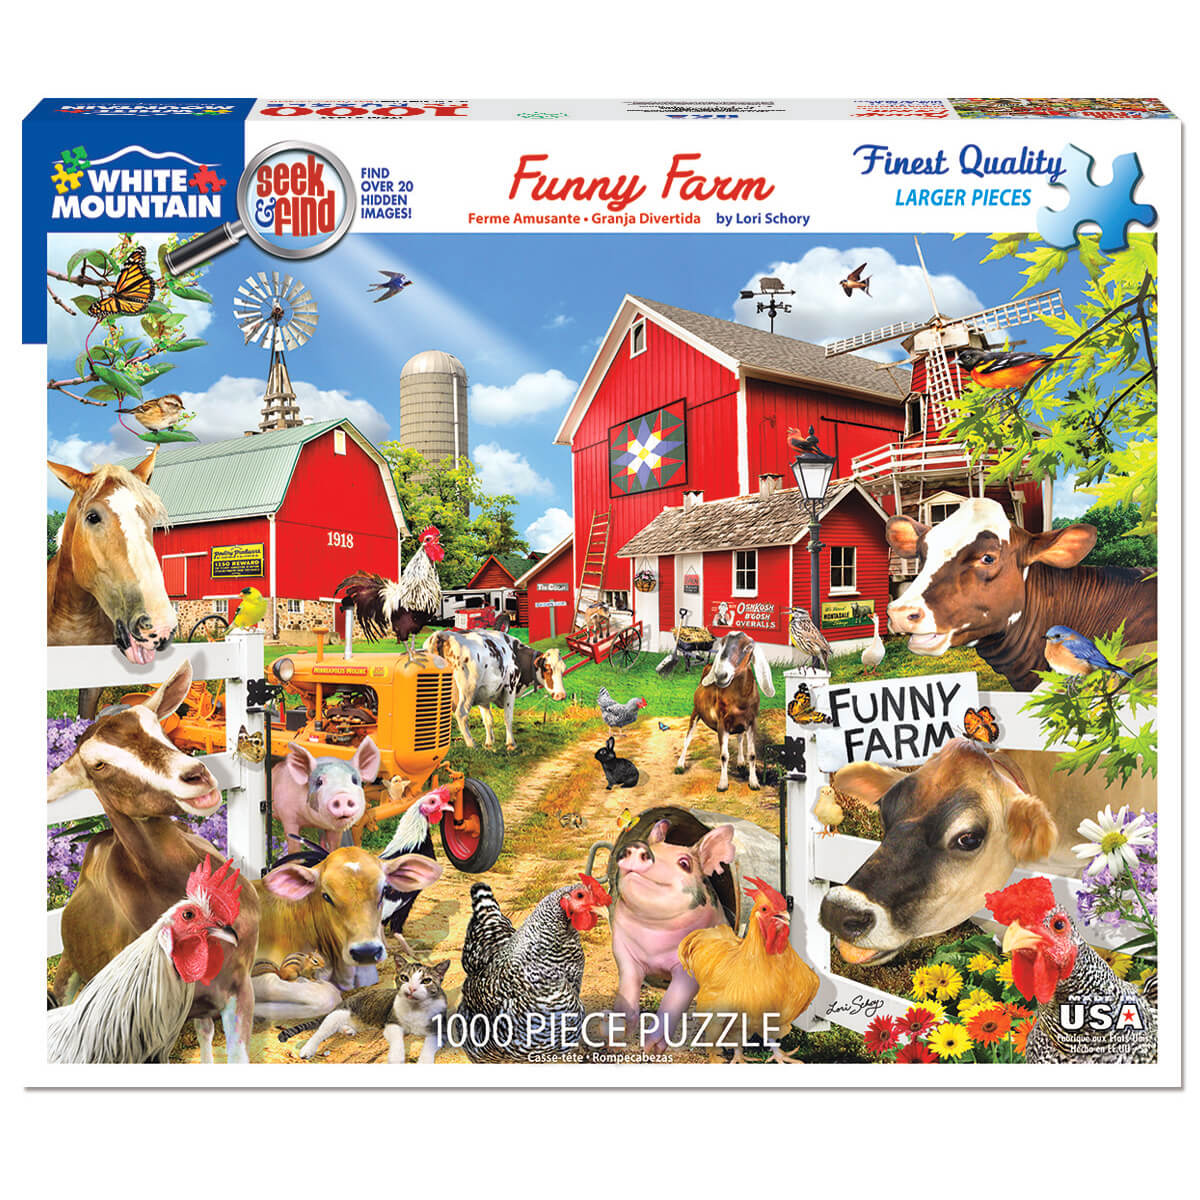 White Mountain Puzzles Funny Farm Seek & Find 1000 Piece Jigsaw Puzzle